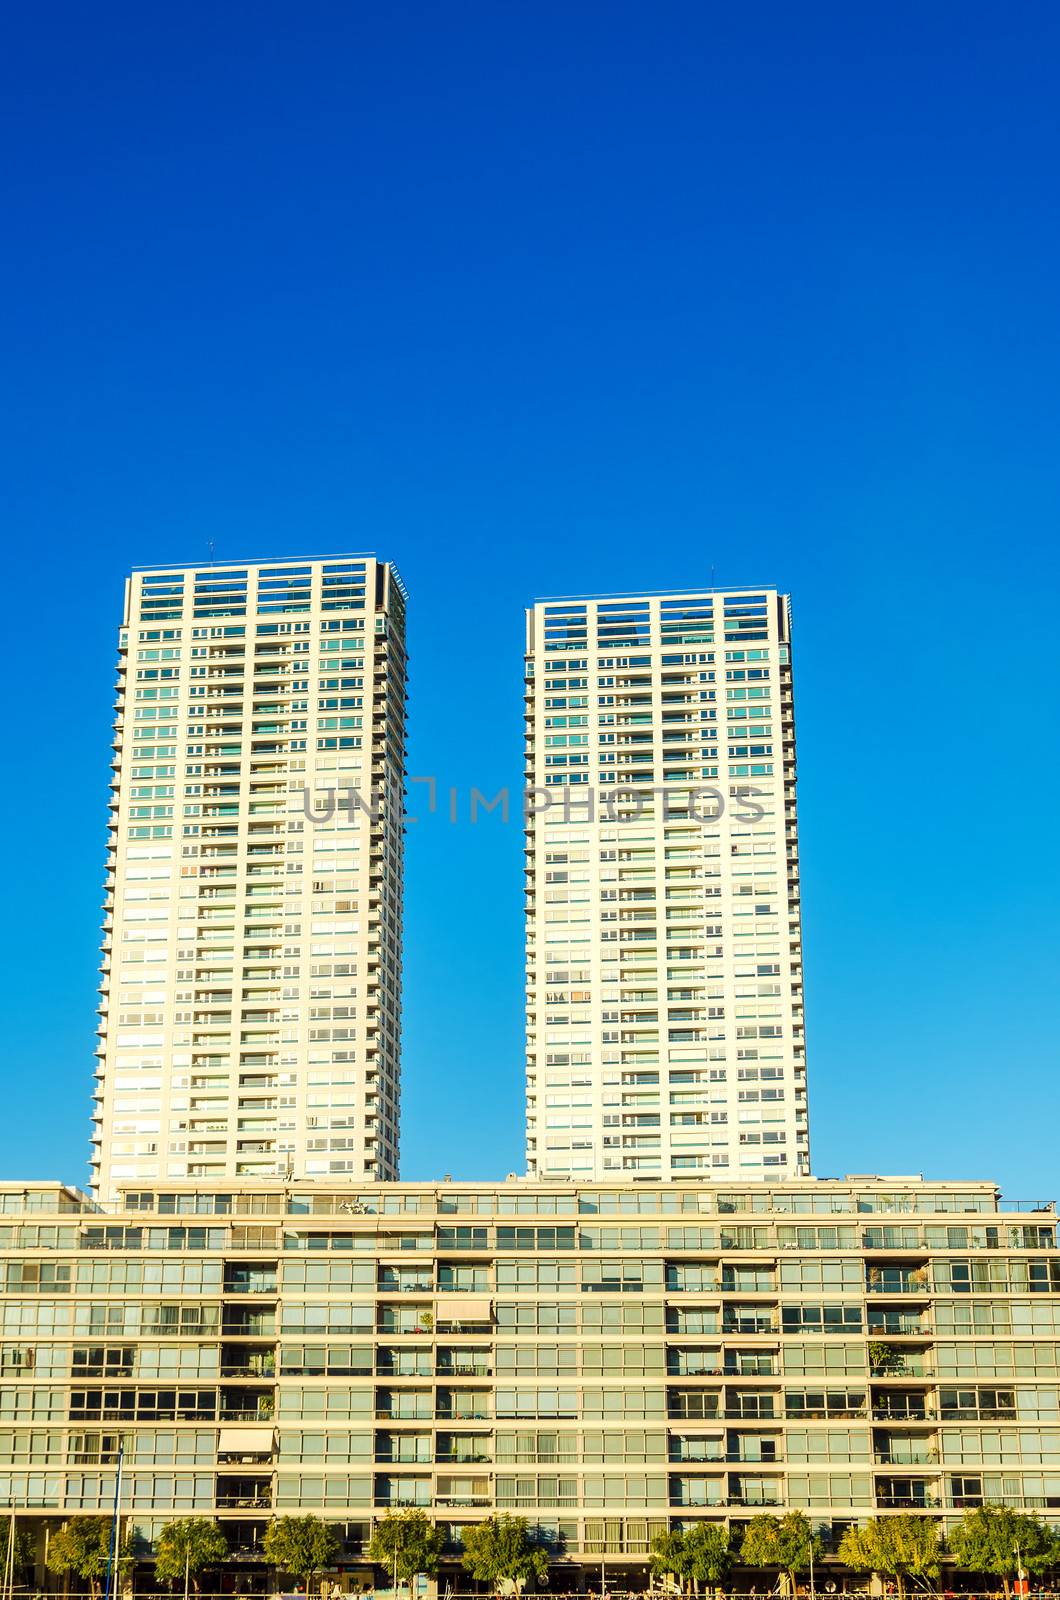 Facades of tall apartment buildings in the Puerto Madero neighborhood of Buenos Aires